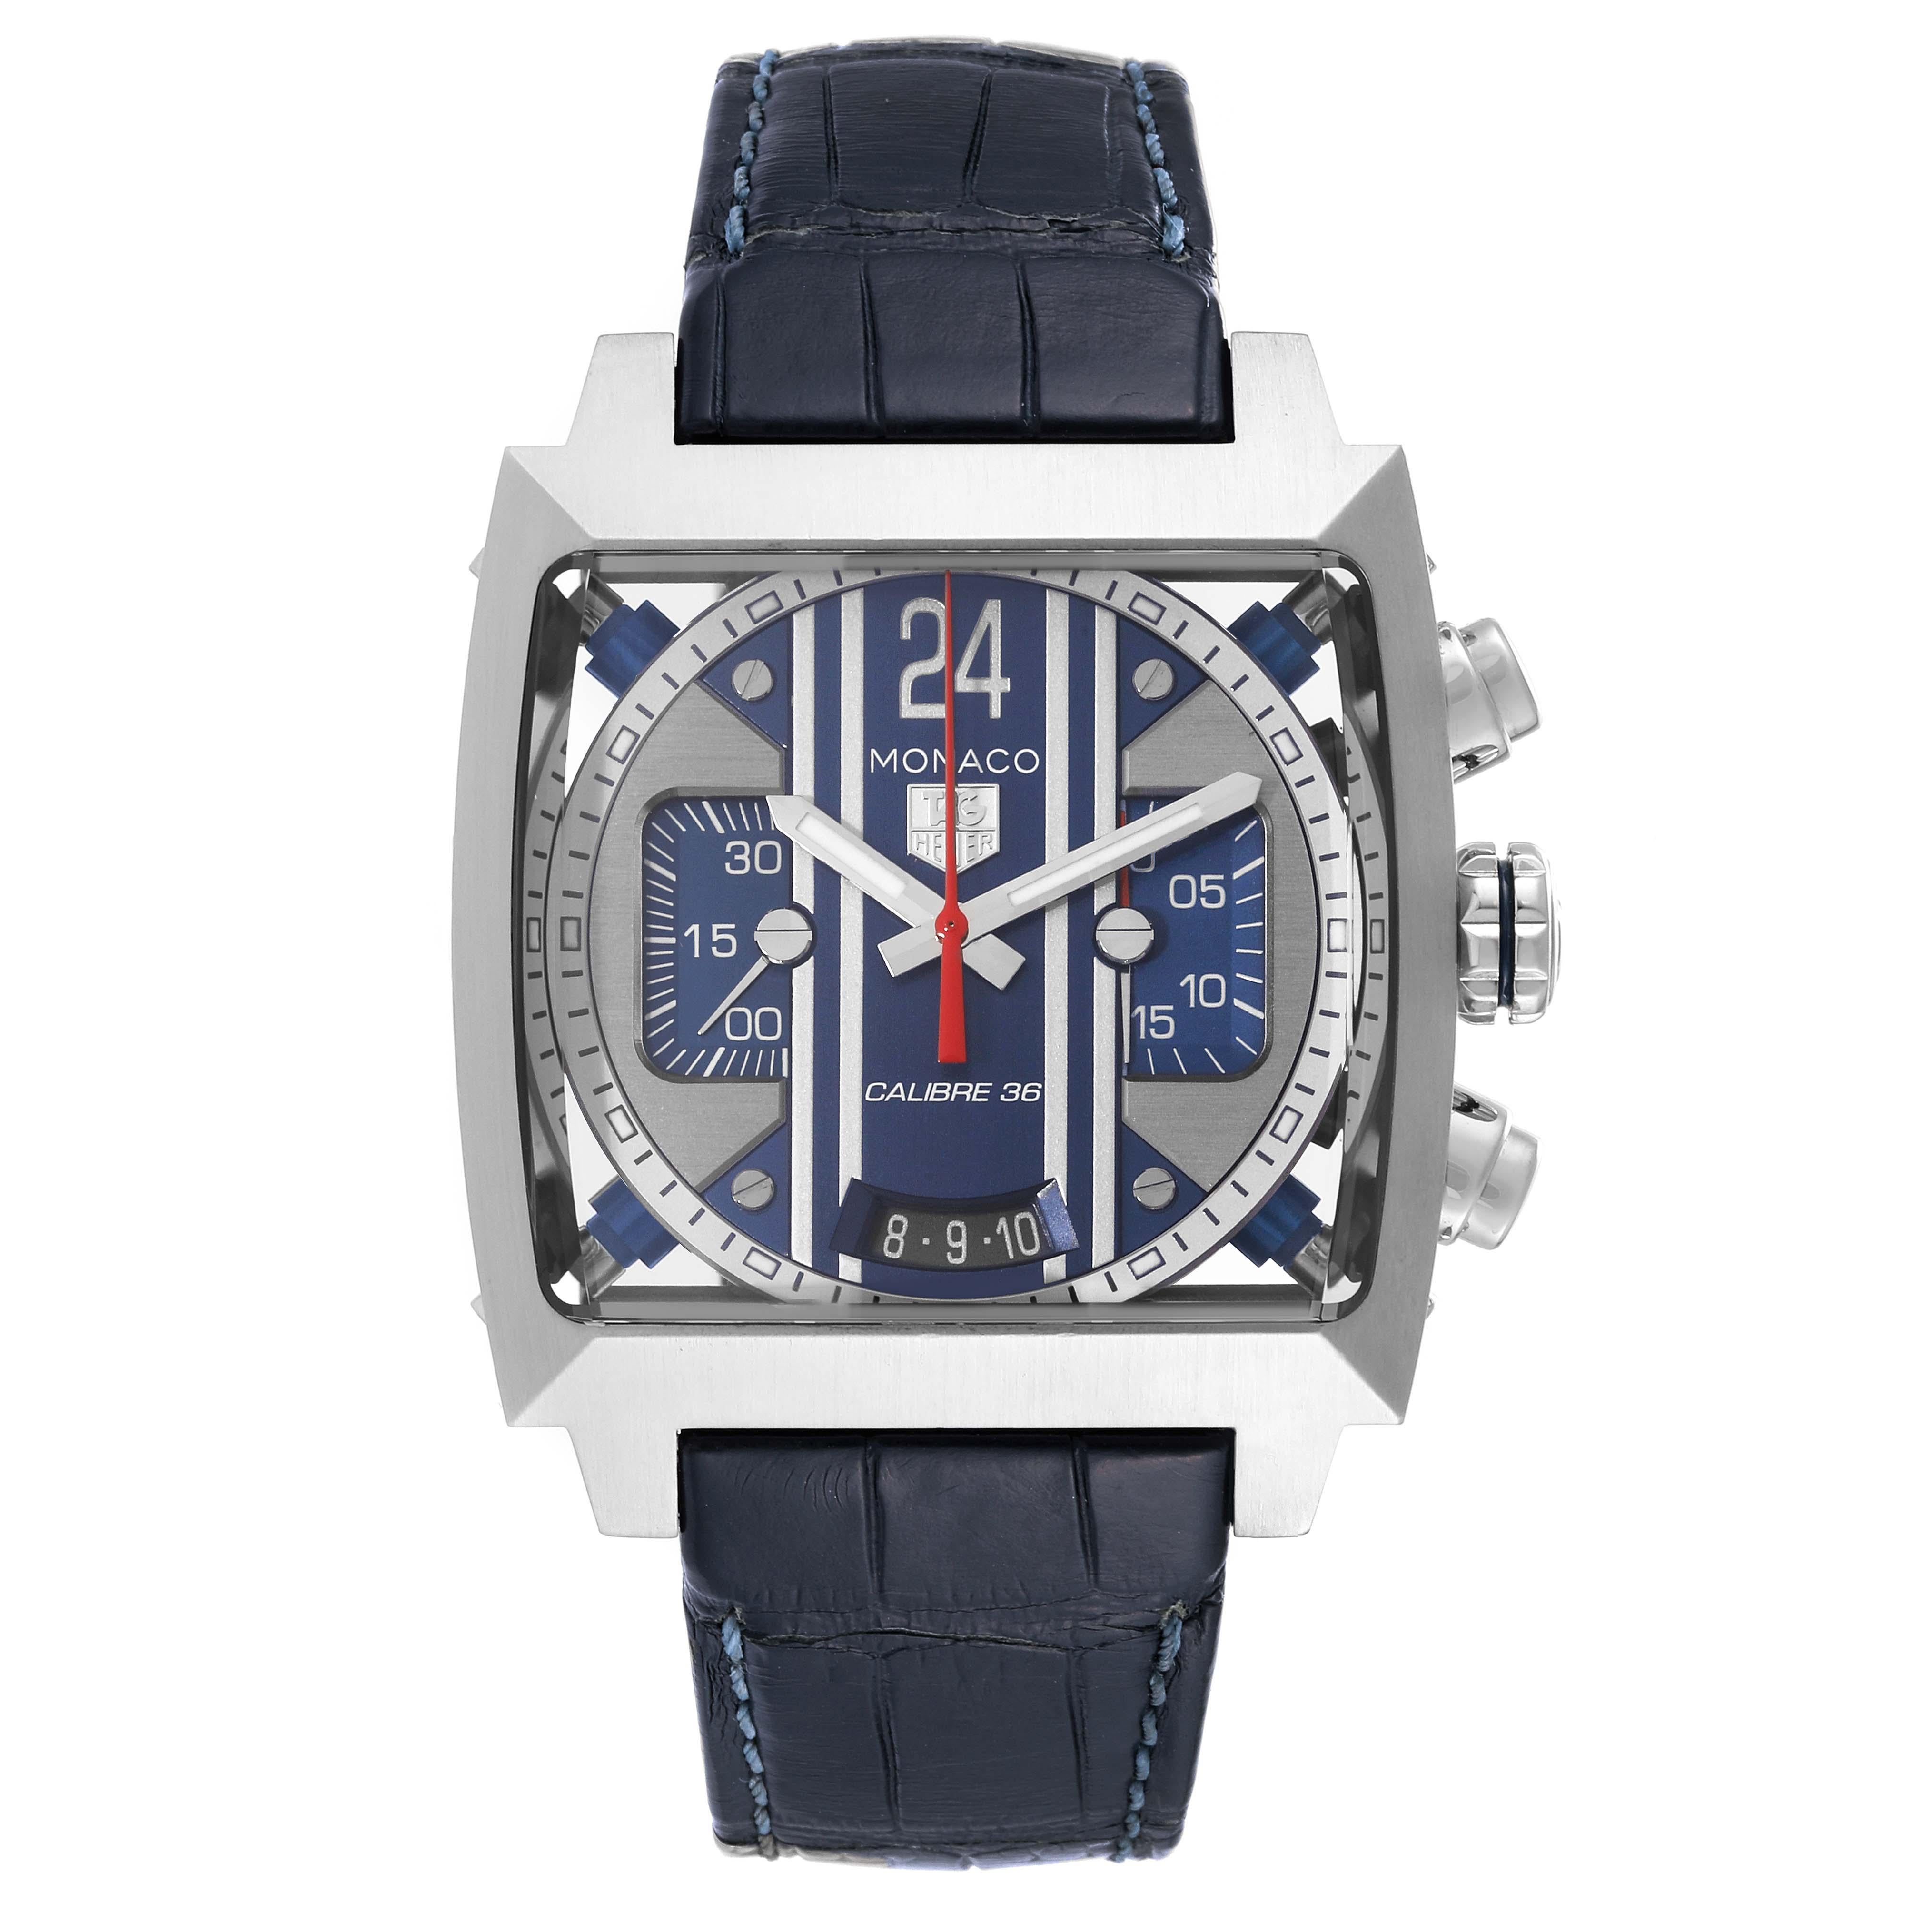 Tag Heuer Monaco 24 Chronograph Steel Mens Watch CAL5111 Box Card. Automatic self-winding movement. Polished stainless steel case 40.5 x 40.5 mm. Case thickness 16.7mm. Transparent exhibition sapphire crystal caseback. Stainless steel bezel. Scratch